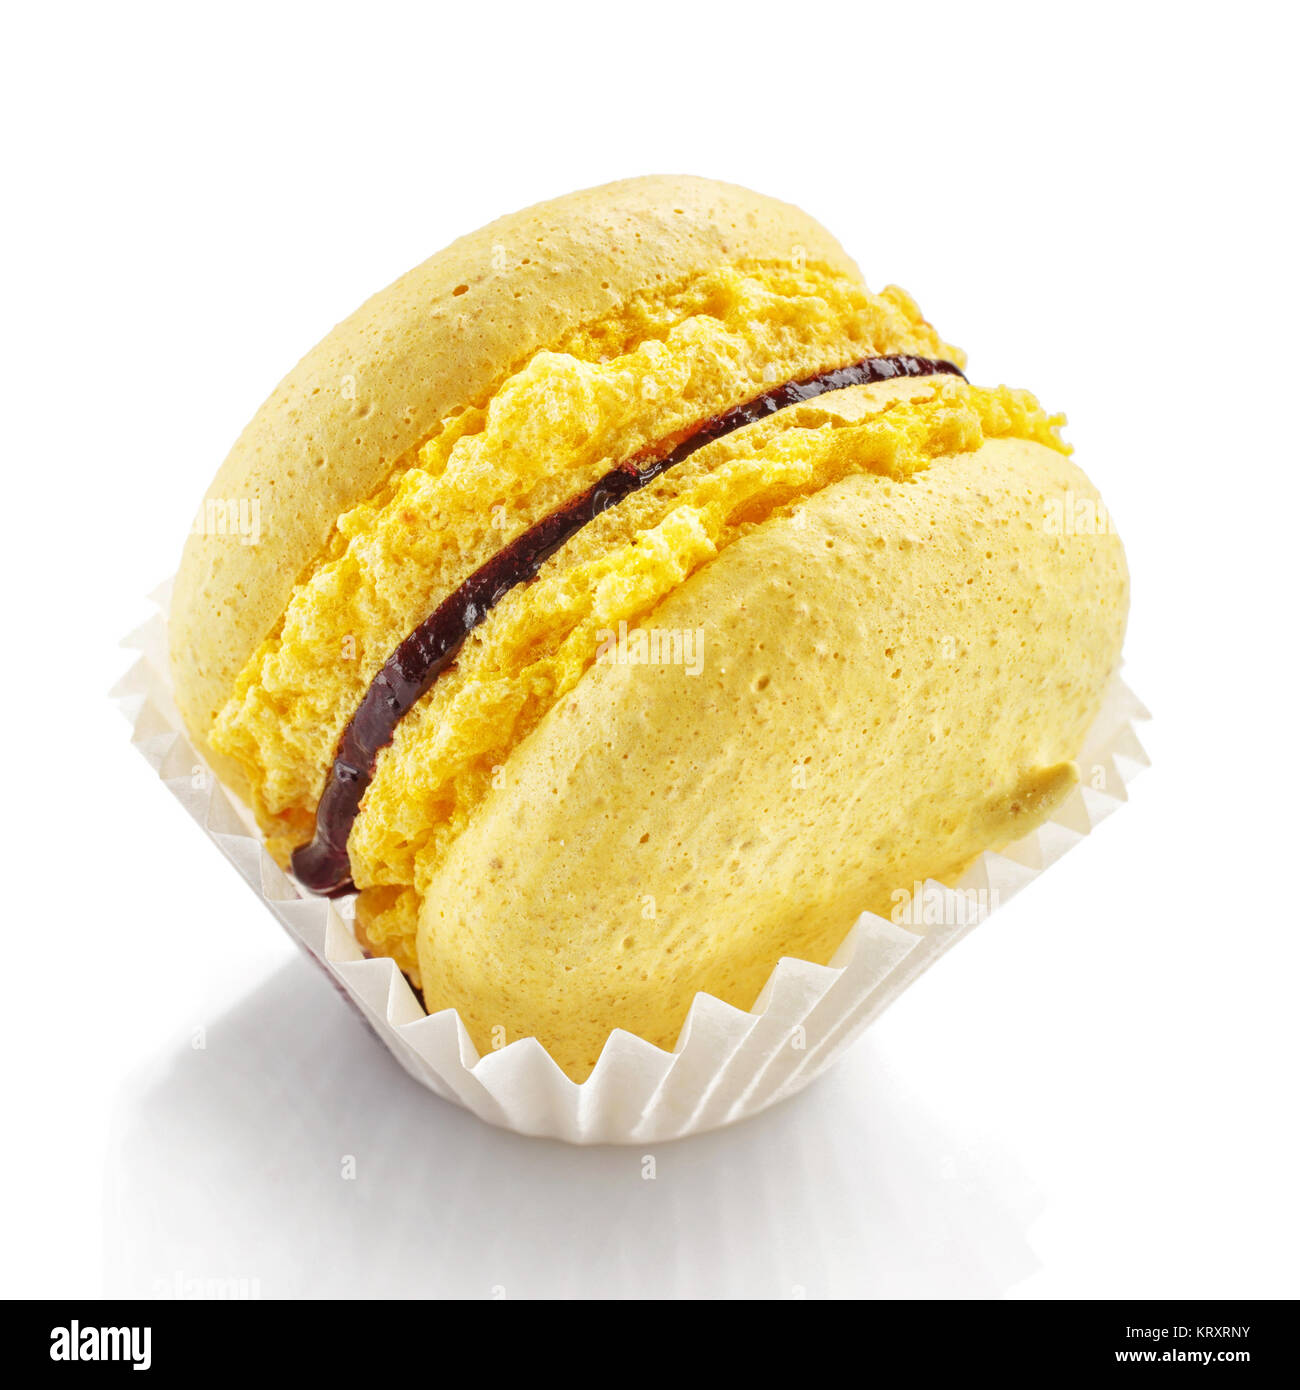 colorful french sweet delicacy, macaroons Stock Photo